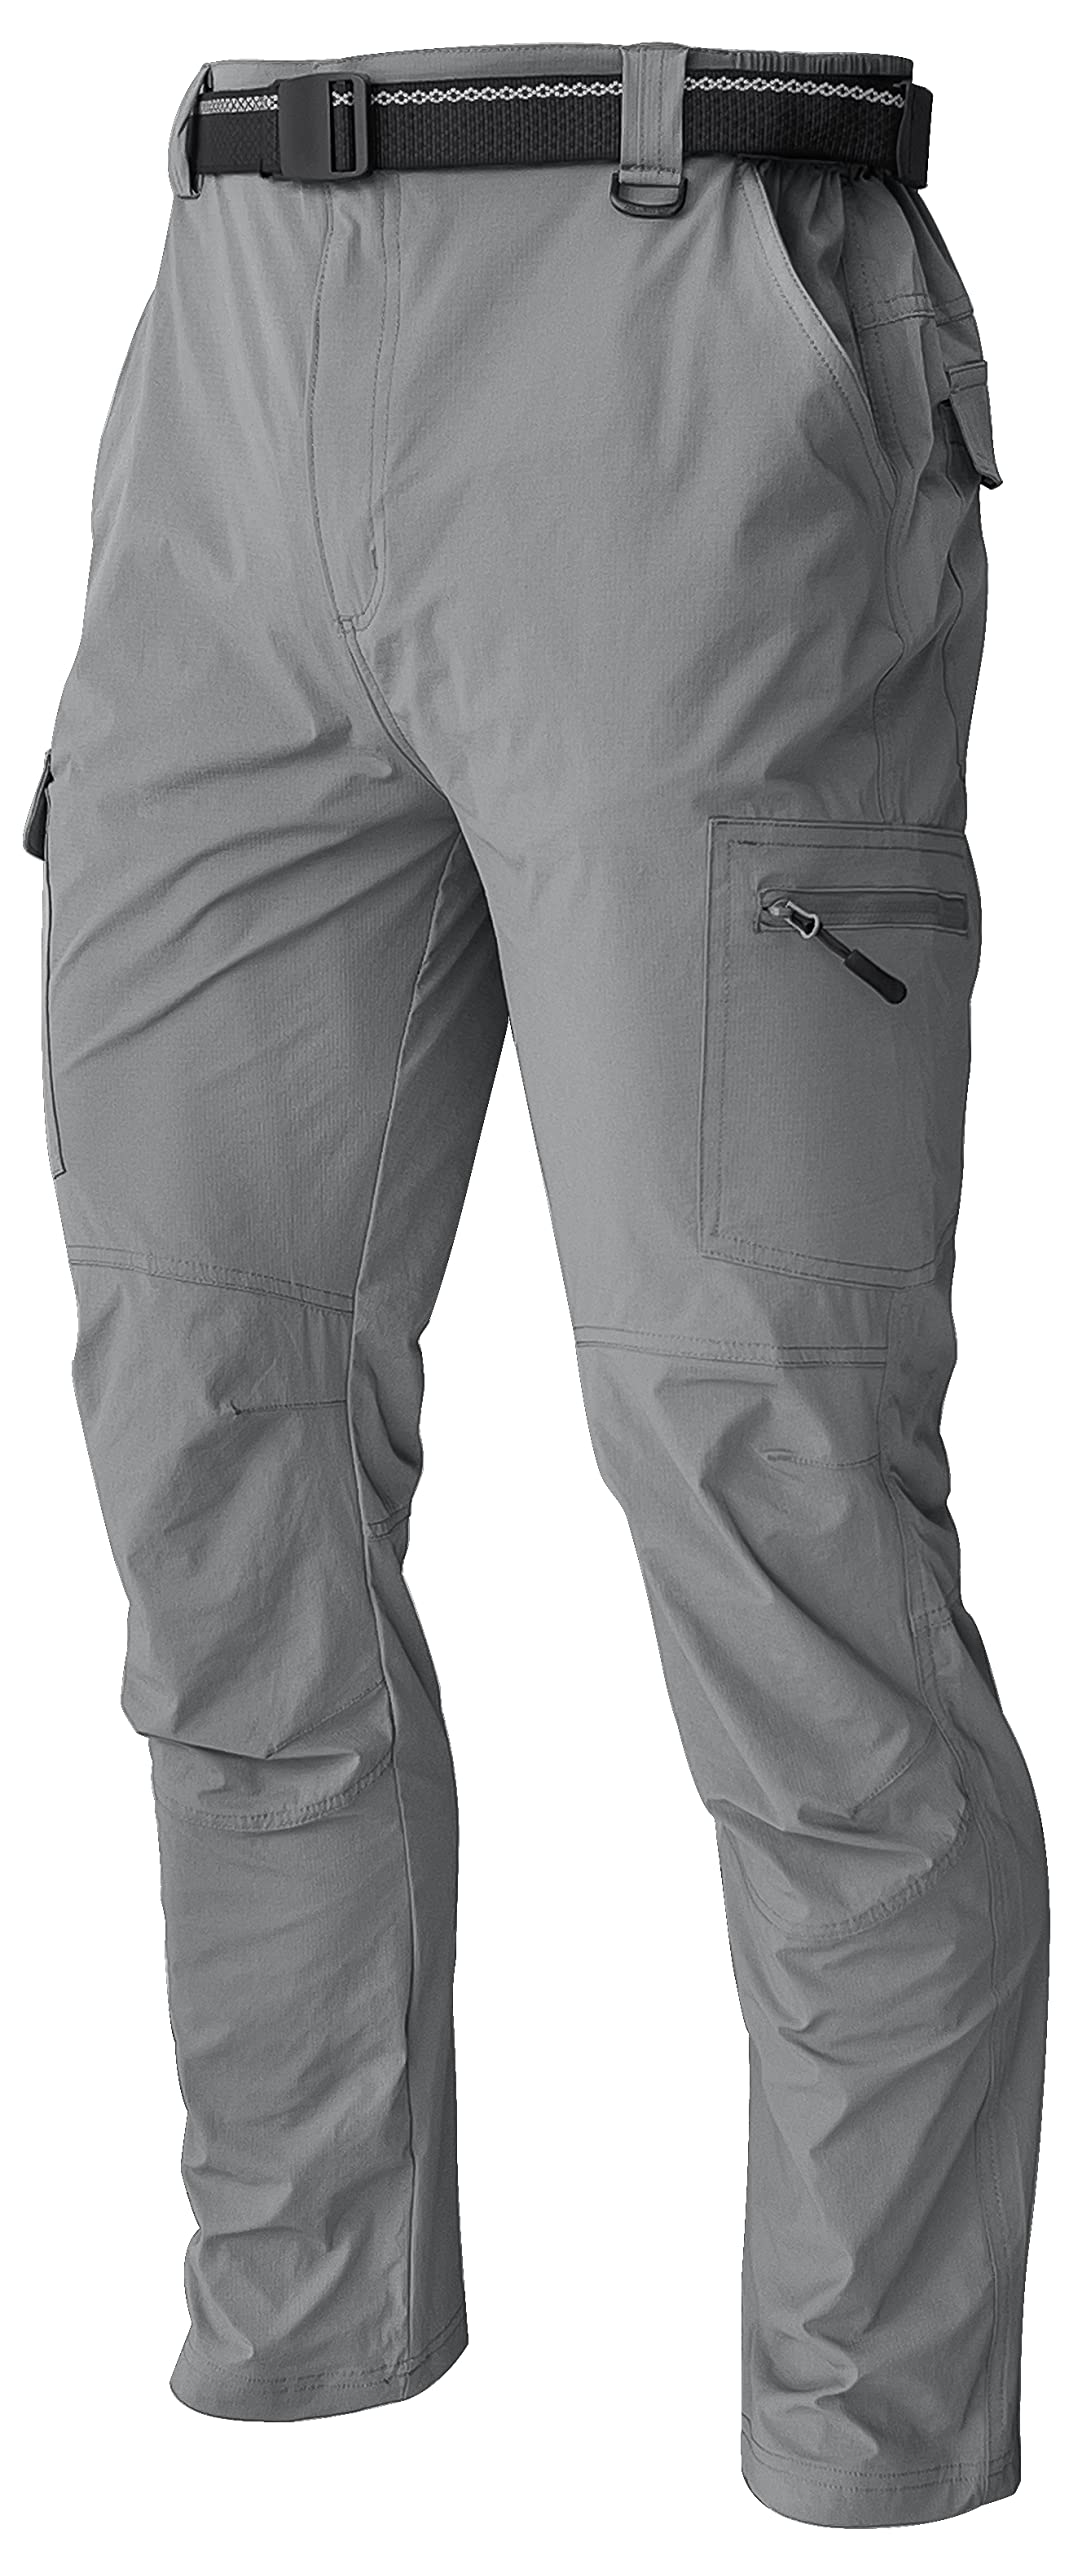 MAGCOMSEN Fishing Pants for Men Quick Dry Water Resistant Hiking Pants Open  Bottom Long Athletic Pants Blue Grey